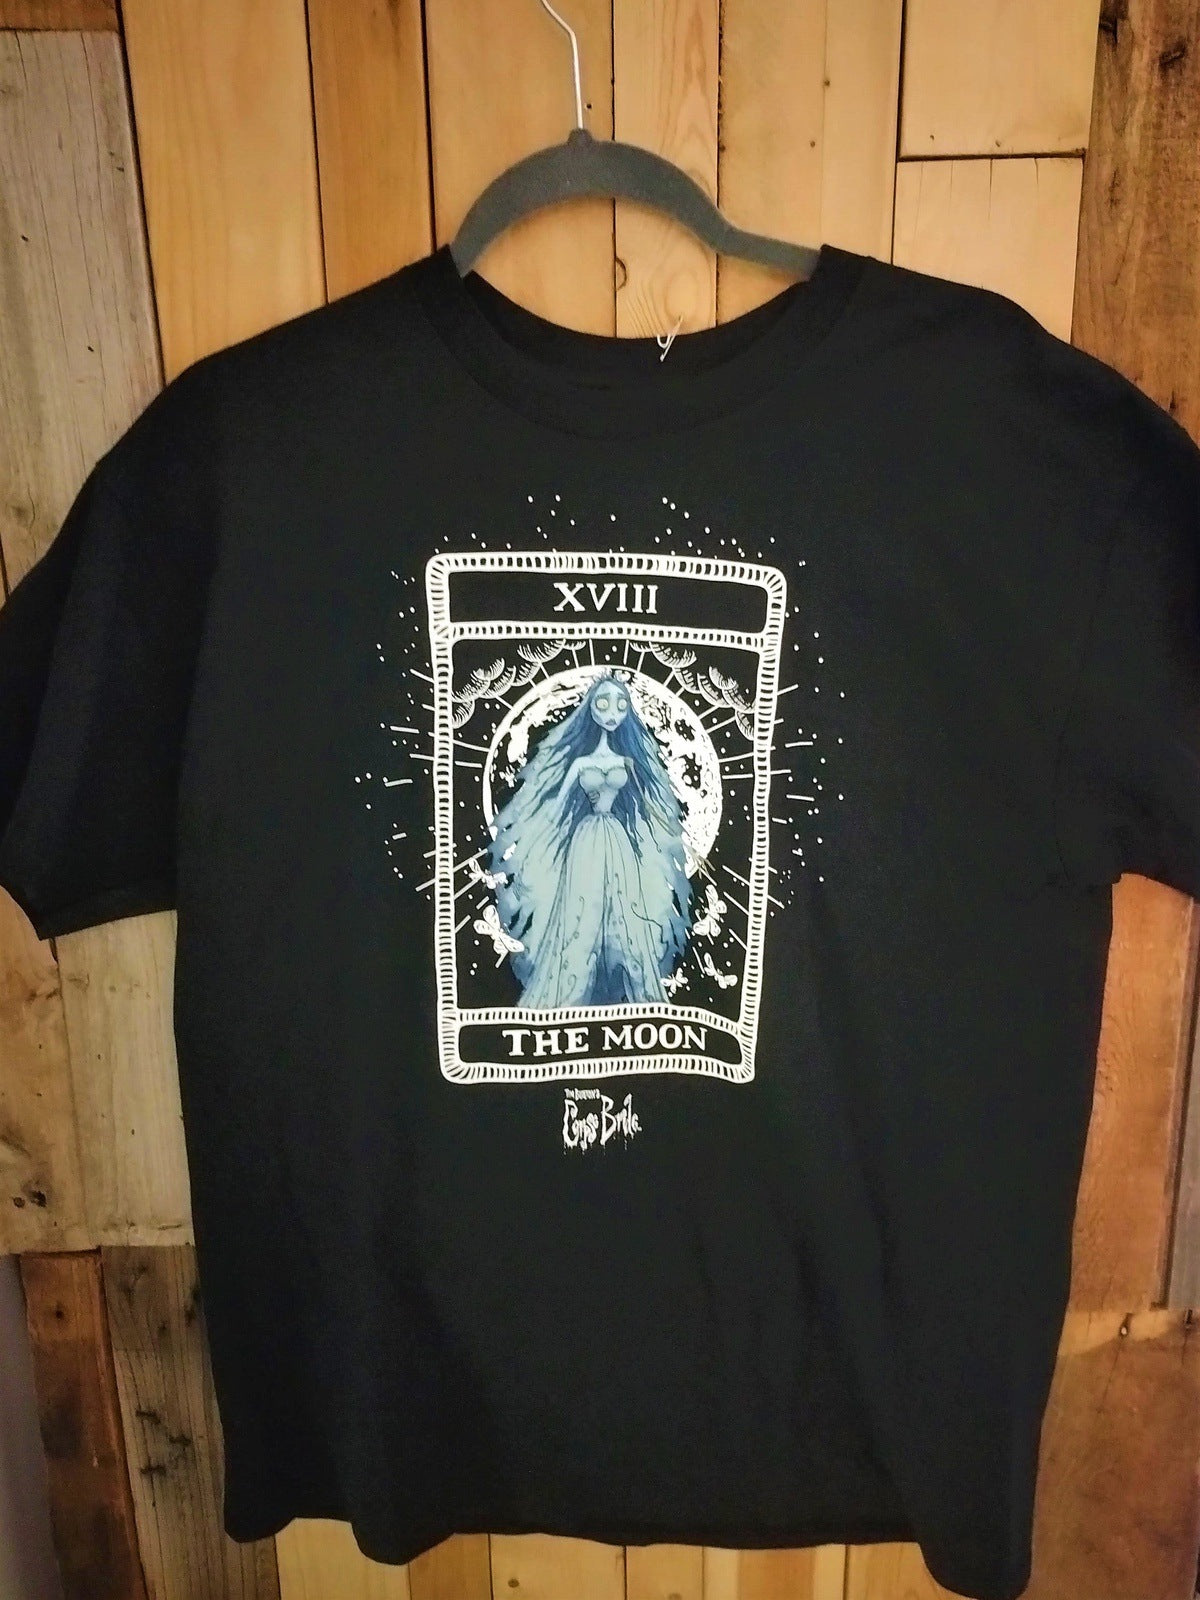 Tim Burton's "Corpse Bride" Official Merchandise T Shirt Size Large New with Tags